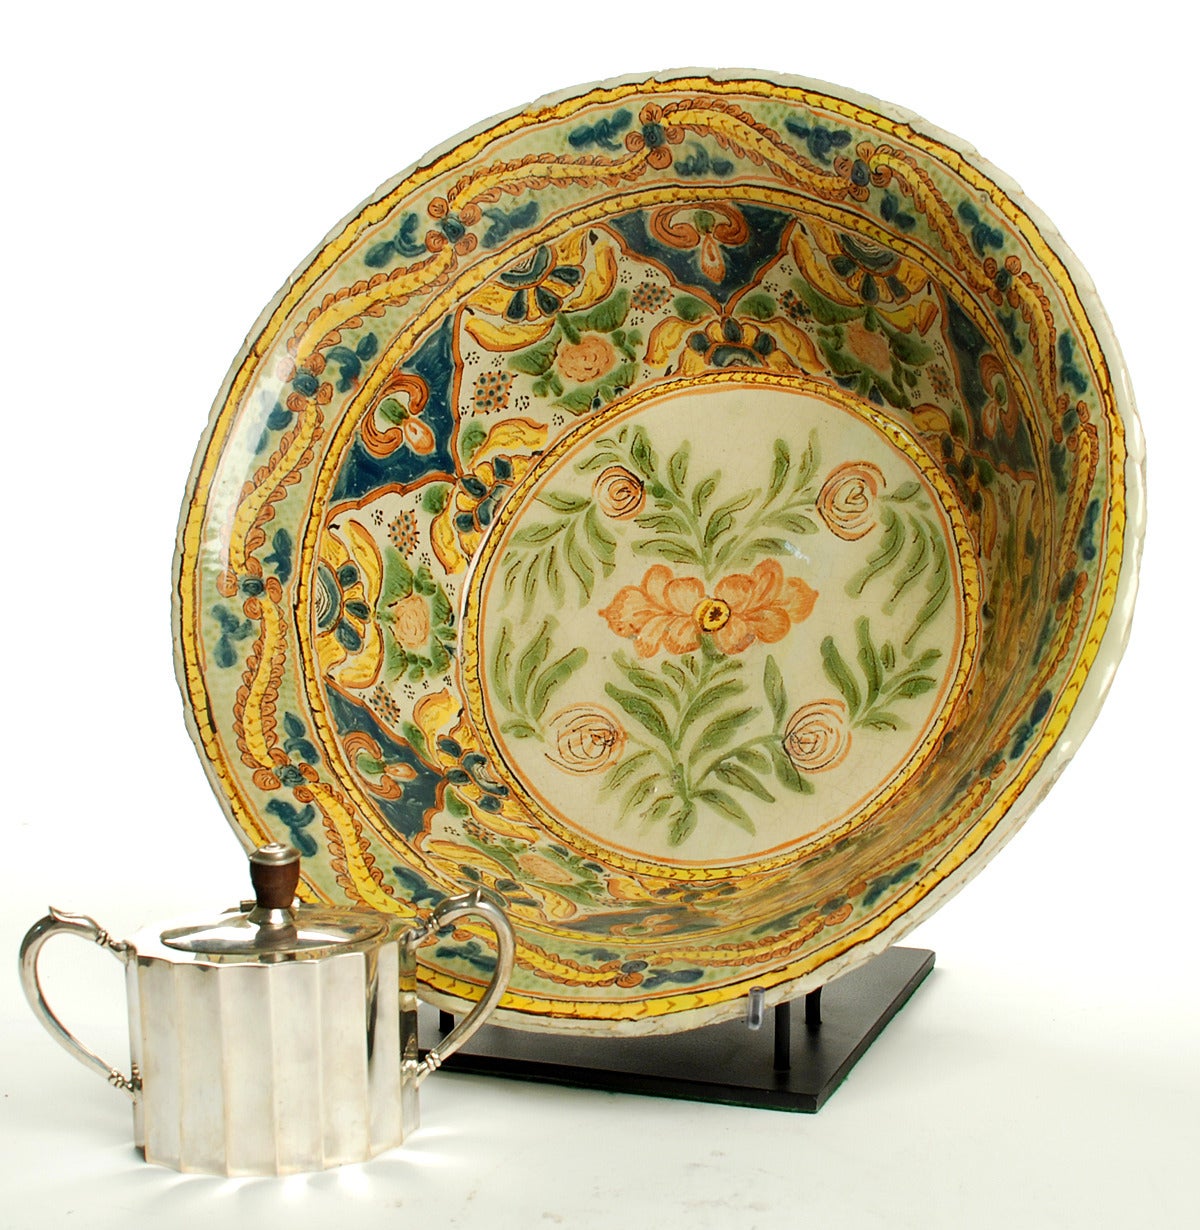 A superb late 18th-early 19th century talavera Poblana Majolica lebrillo with colorful floral motif in olive green, copper green and salmon surrounded by rings of yellow / gold and cobalt foliate patterns. Puebla, Mexico, circa 1800. 

Displayed